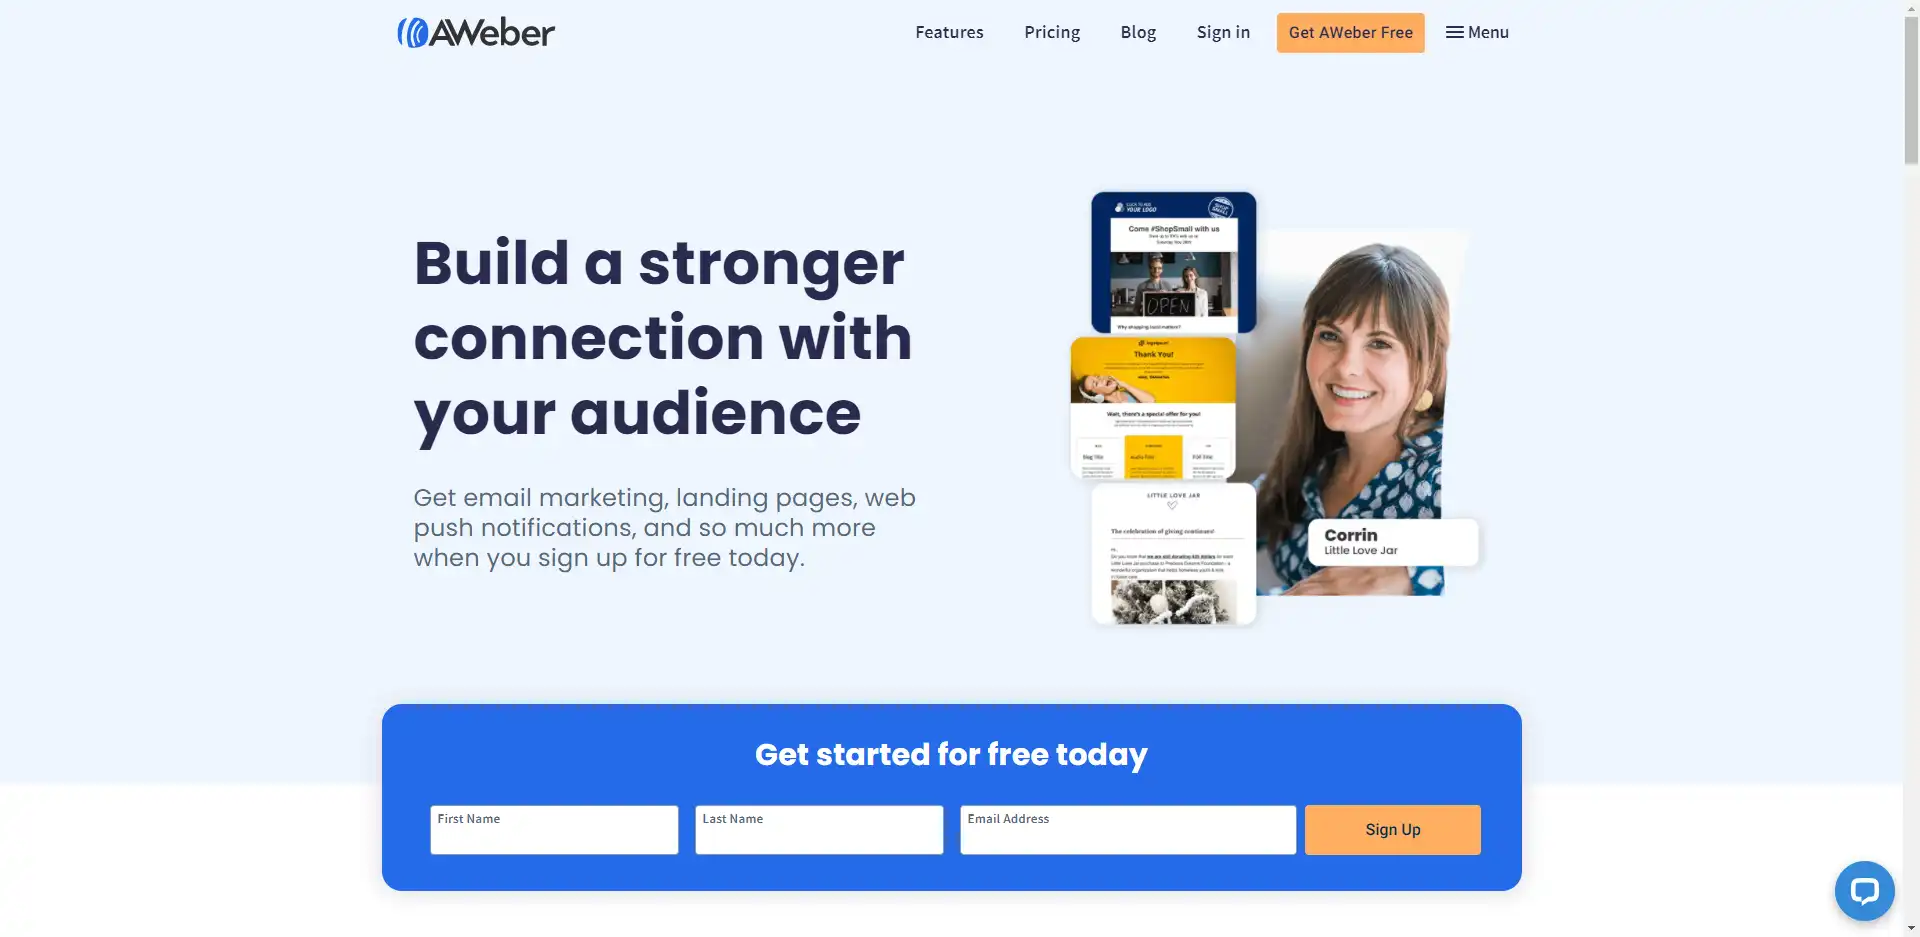 This is the screenshot of the Aweber's website. AWeber is one of the leading email marketing tools in the world